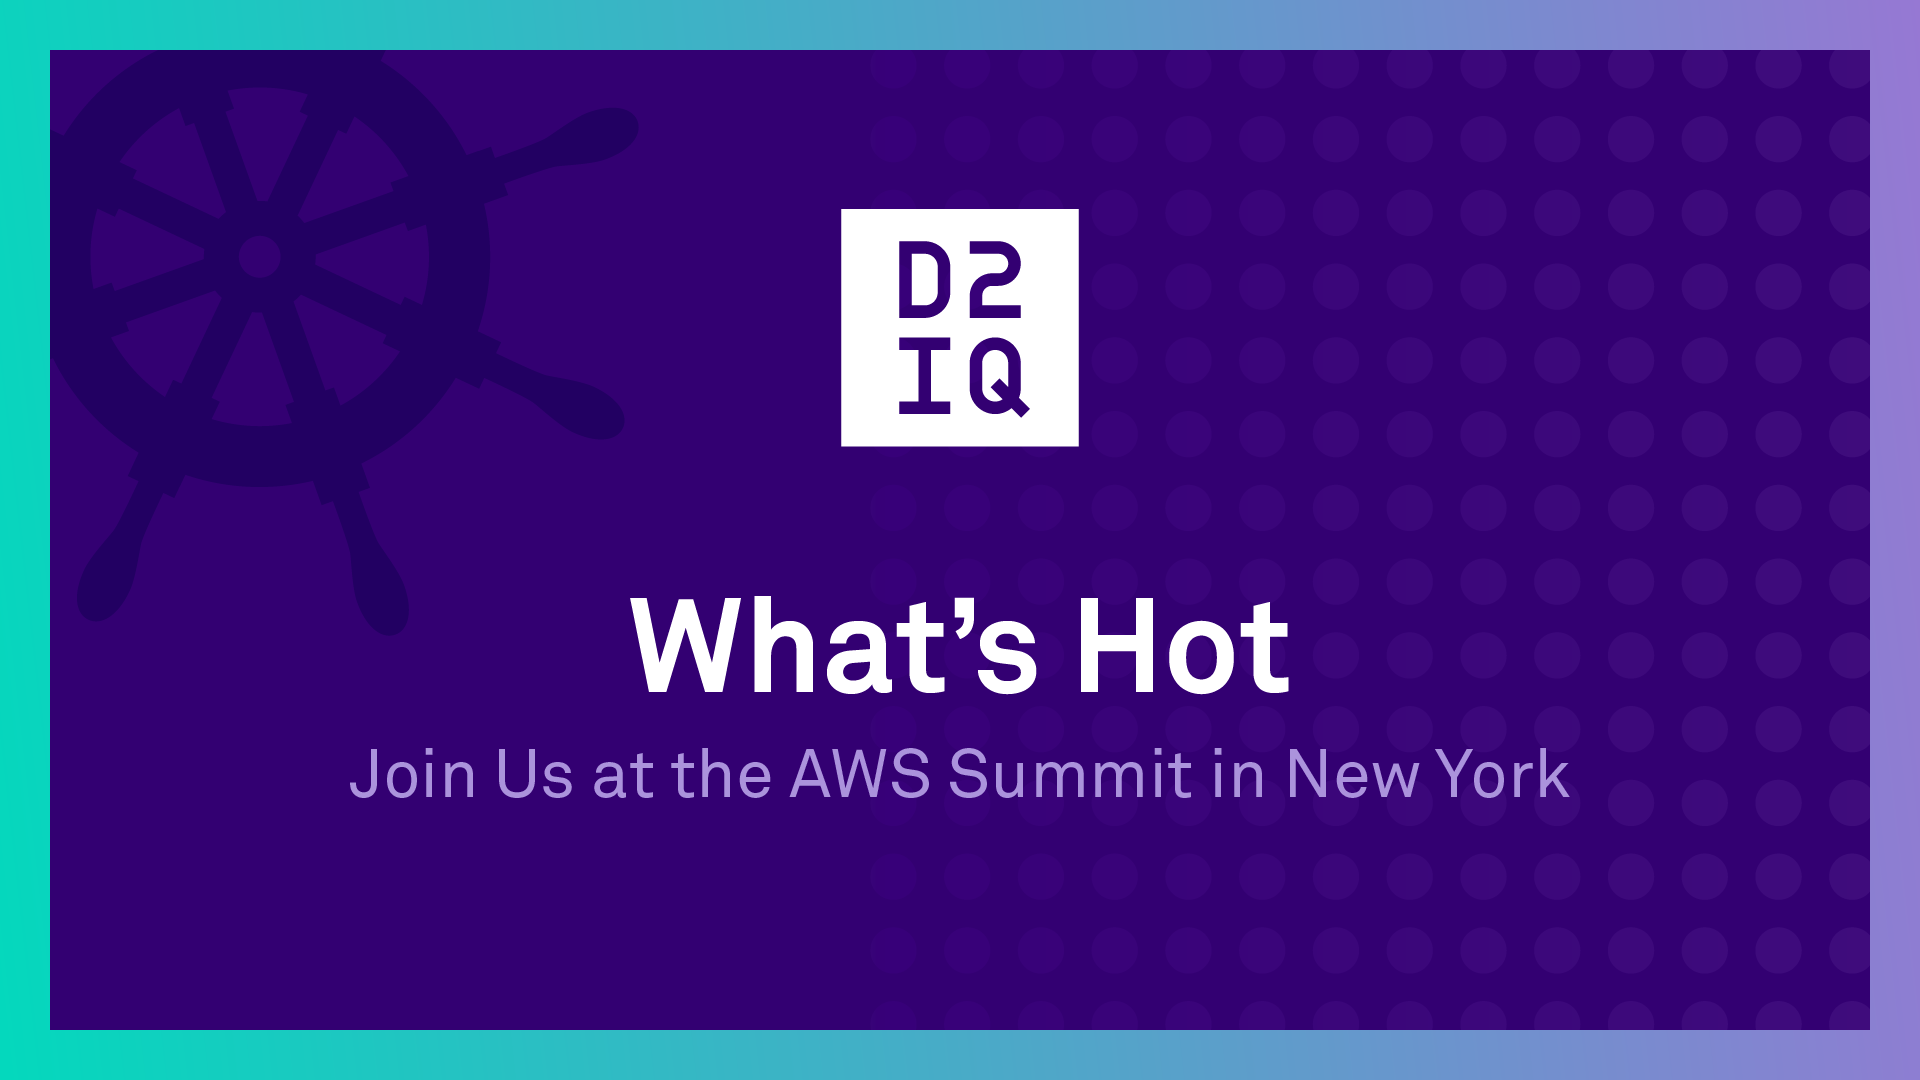 Join D2iQ at the AWS Summit in New York